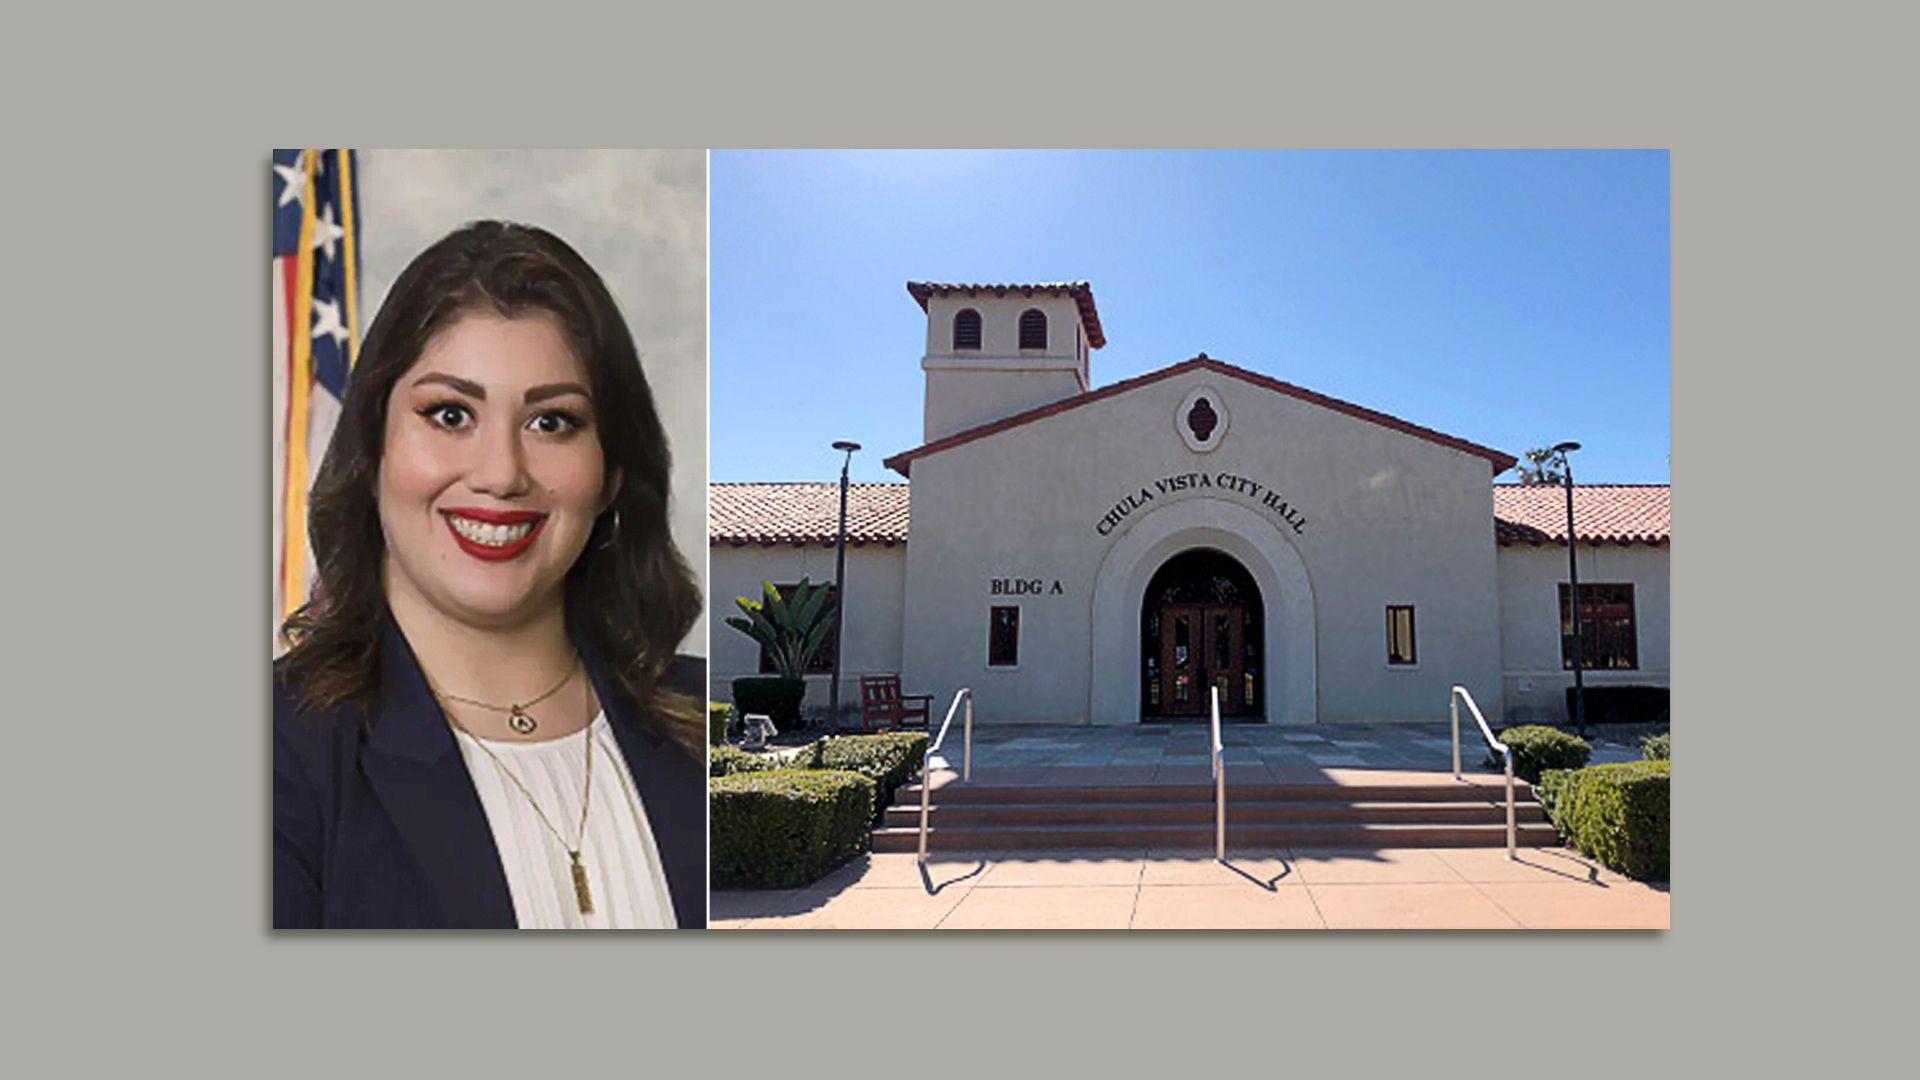 A side by side image of a councilwoman and a city hall building.